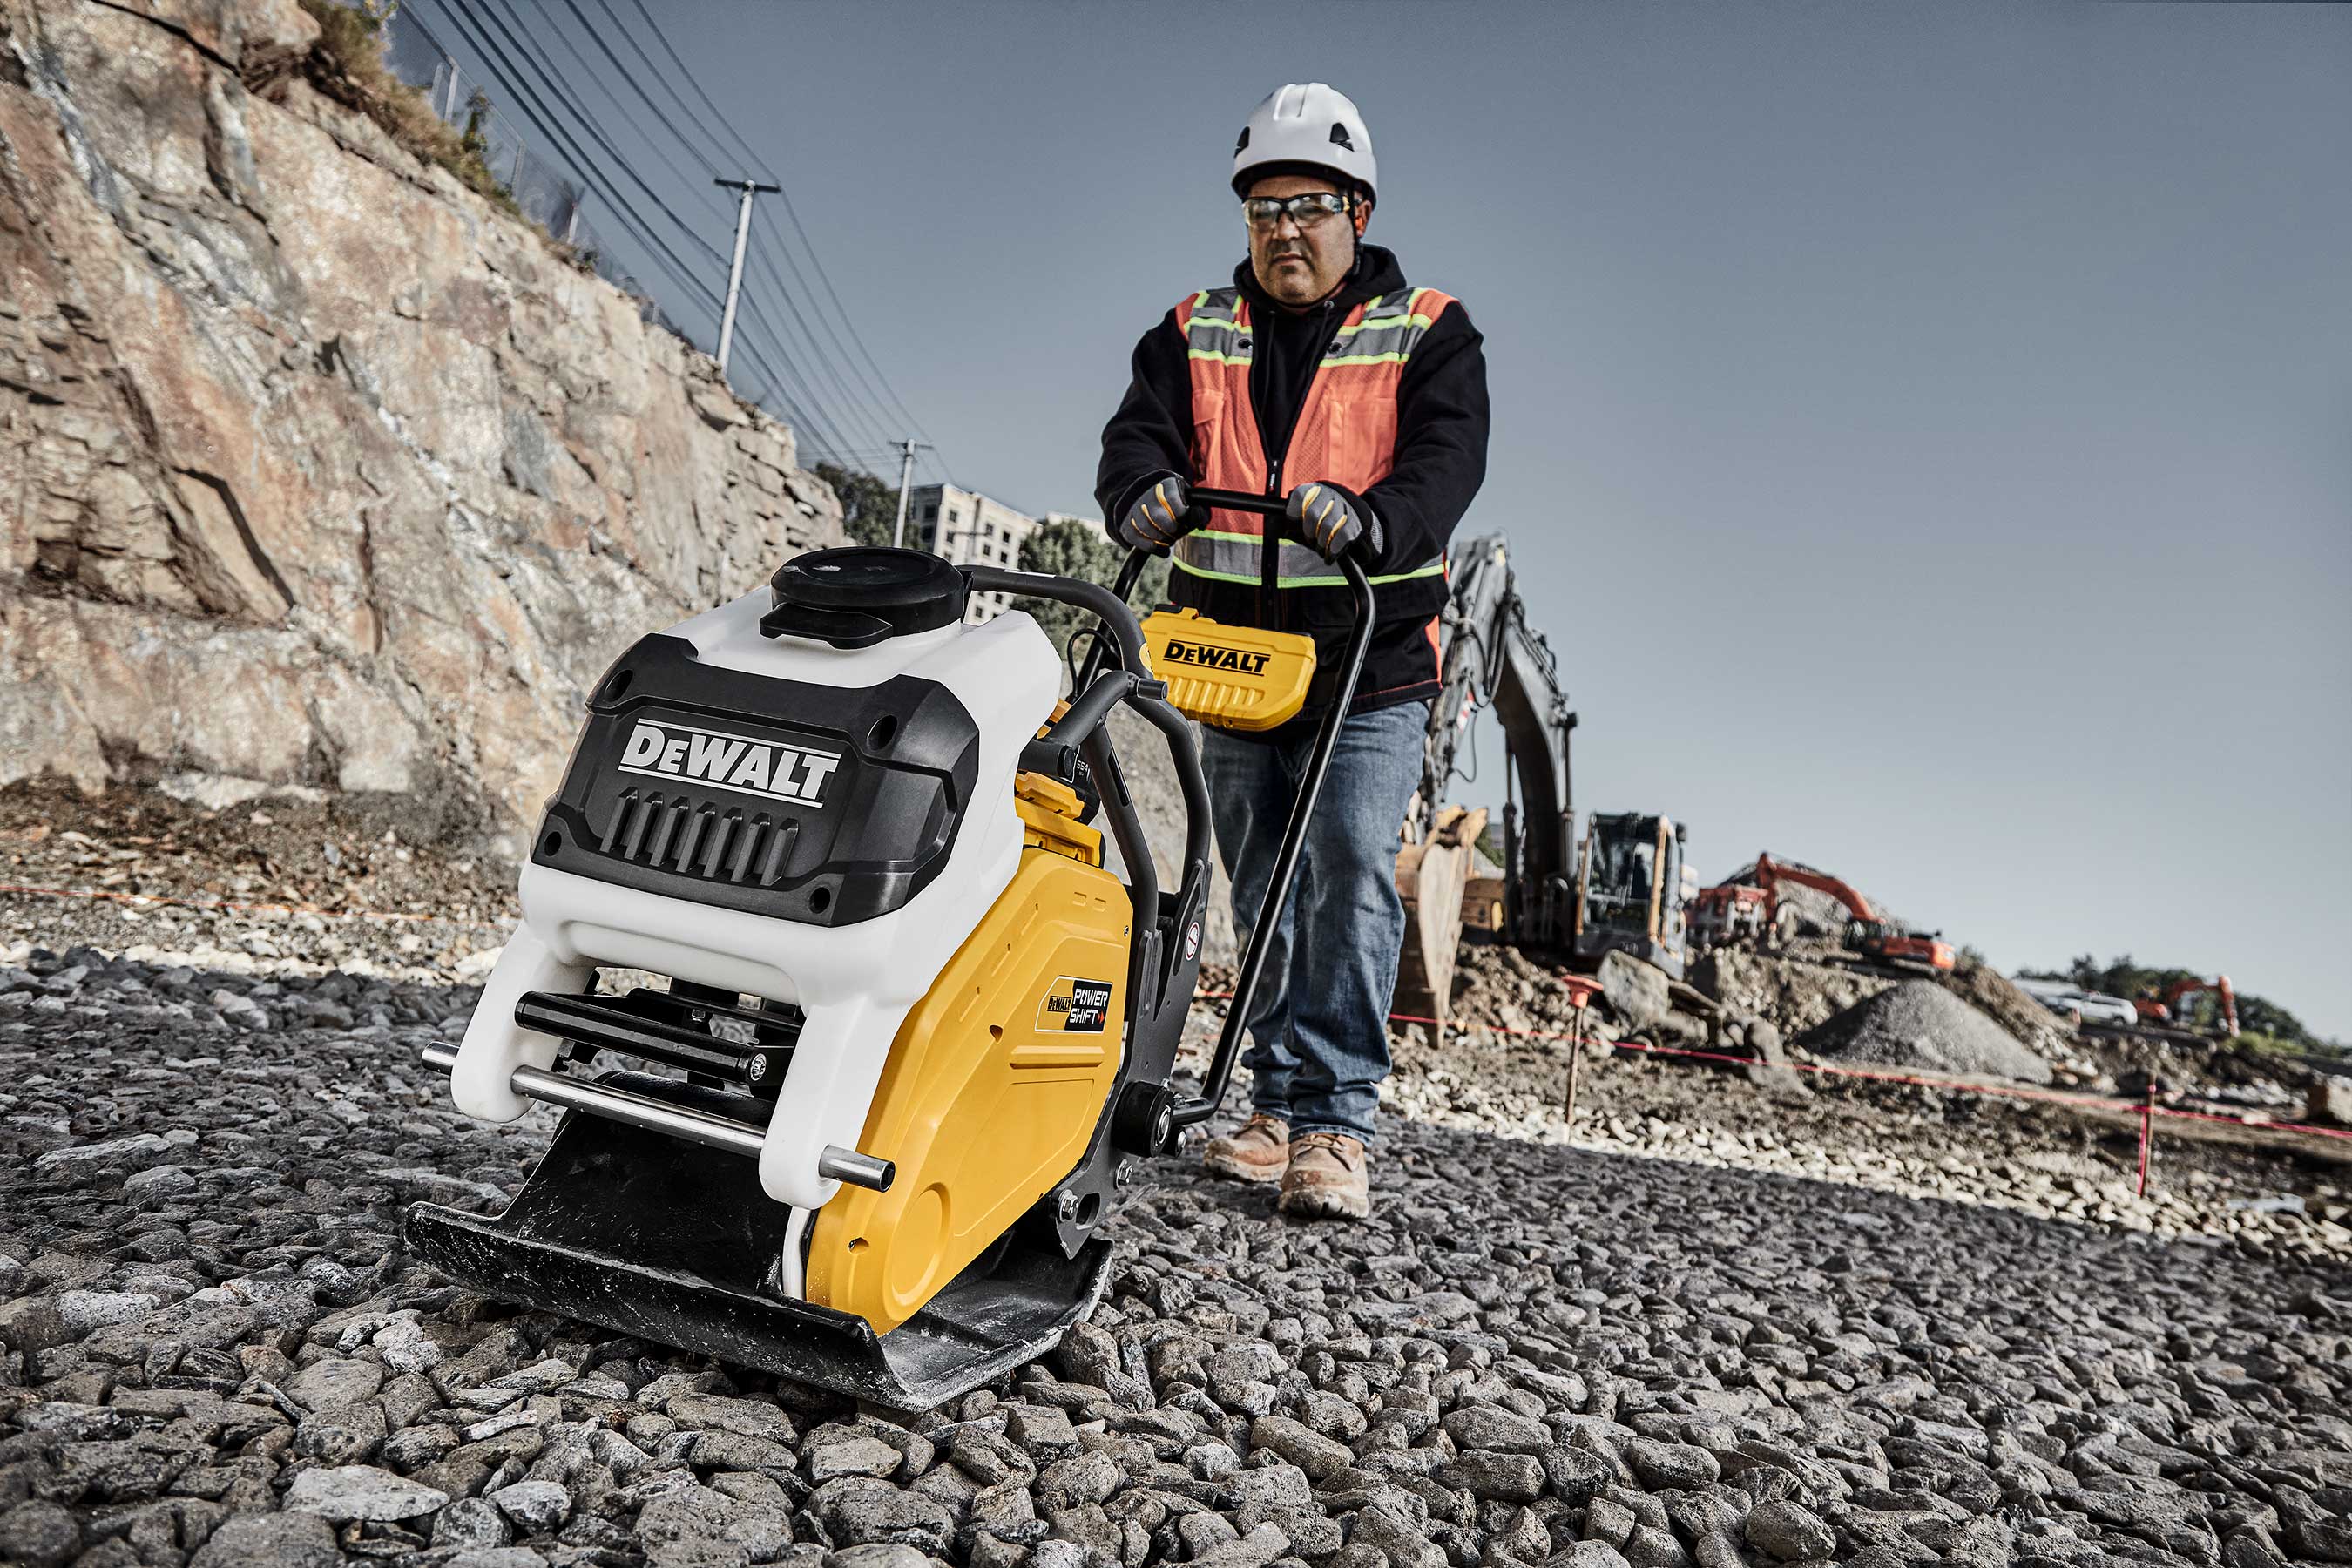 The DEWALT POWERSHIFT™ Plate Compactor provides 3,370ft lbs. of force through its 15.7-in. plate with controls that are mounted on an ergonomic folding handle for increased user control and comfort.